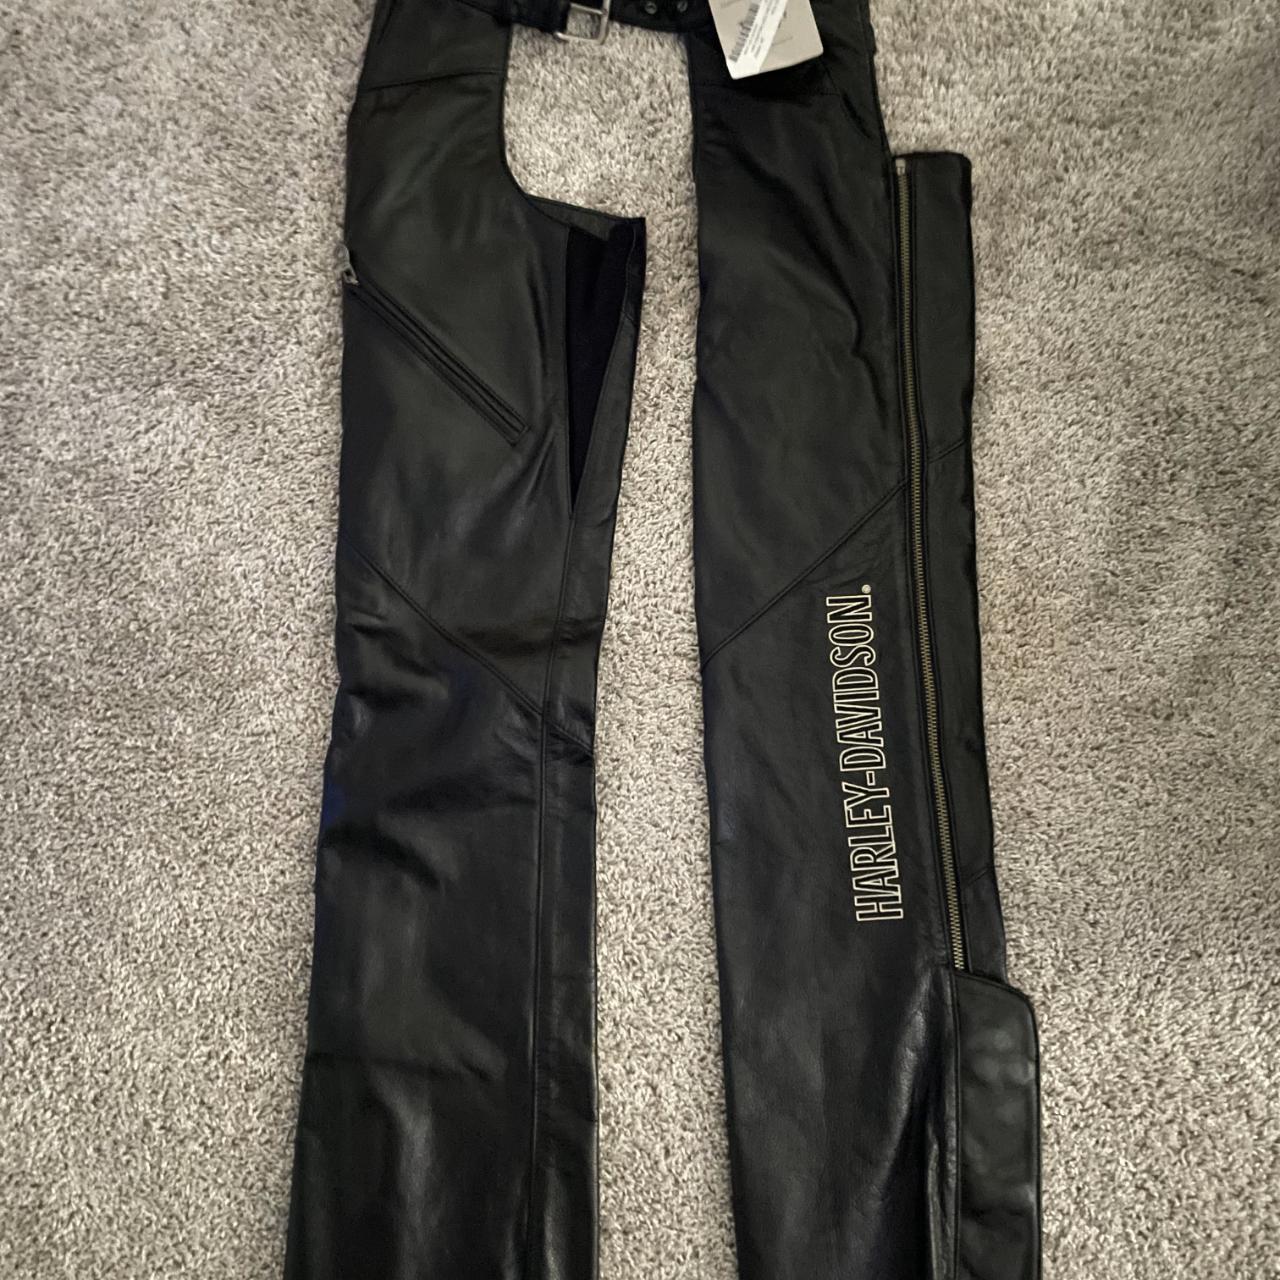 Harley Davidson real leather chaps never worn xs - Depop